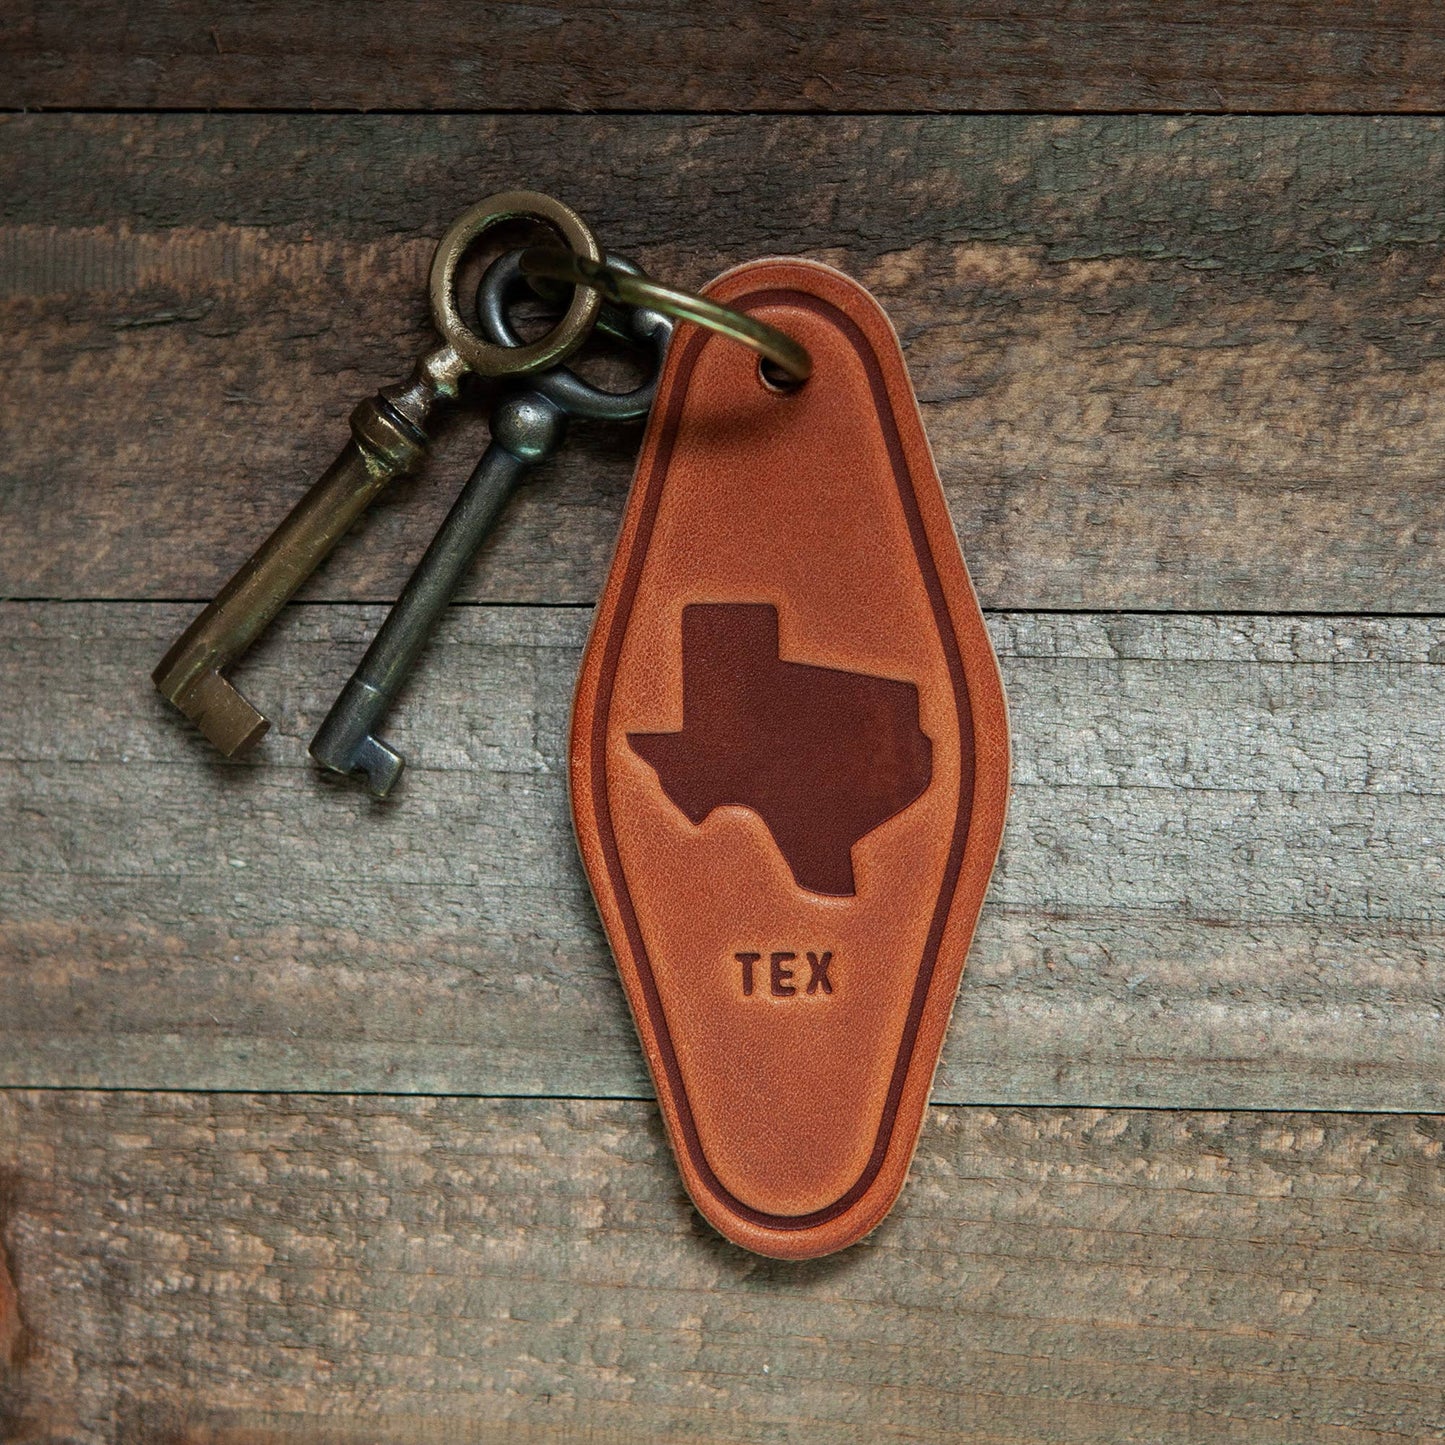 Texas Silhouette Leather Motel Keychain